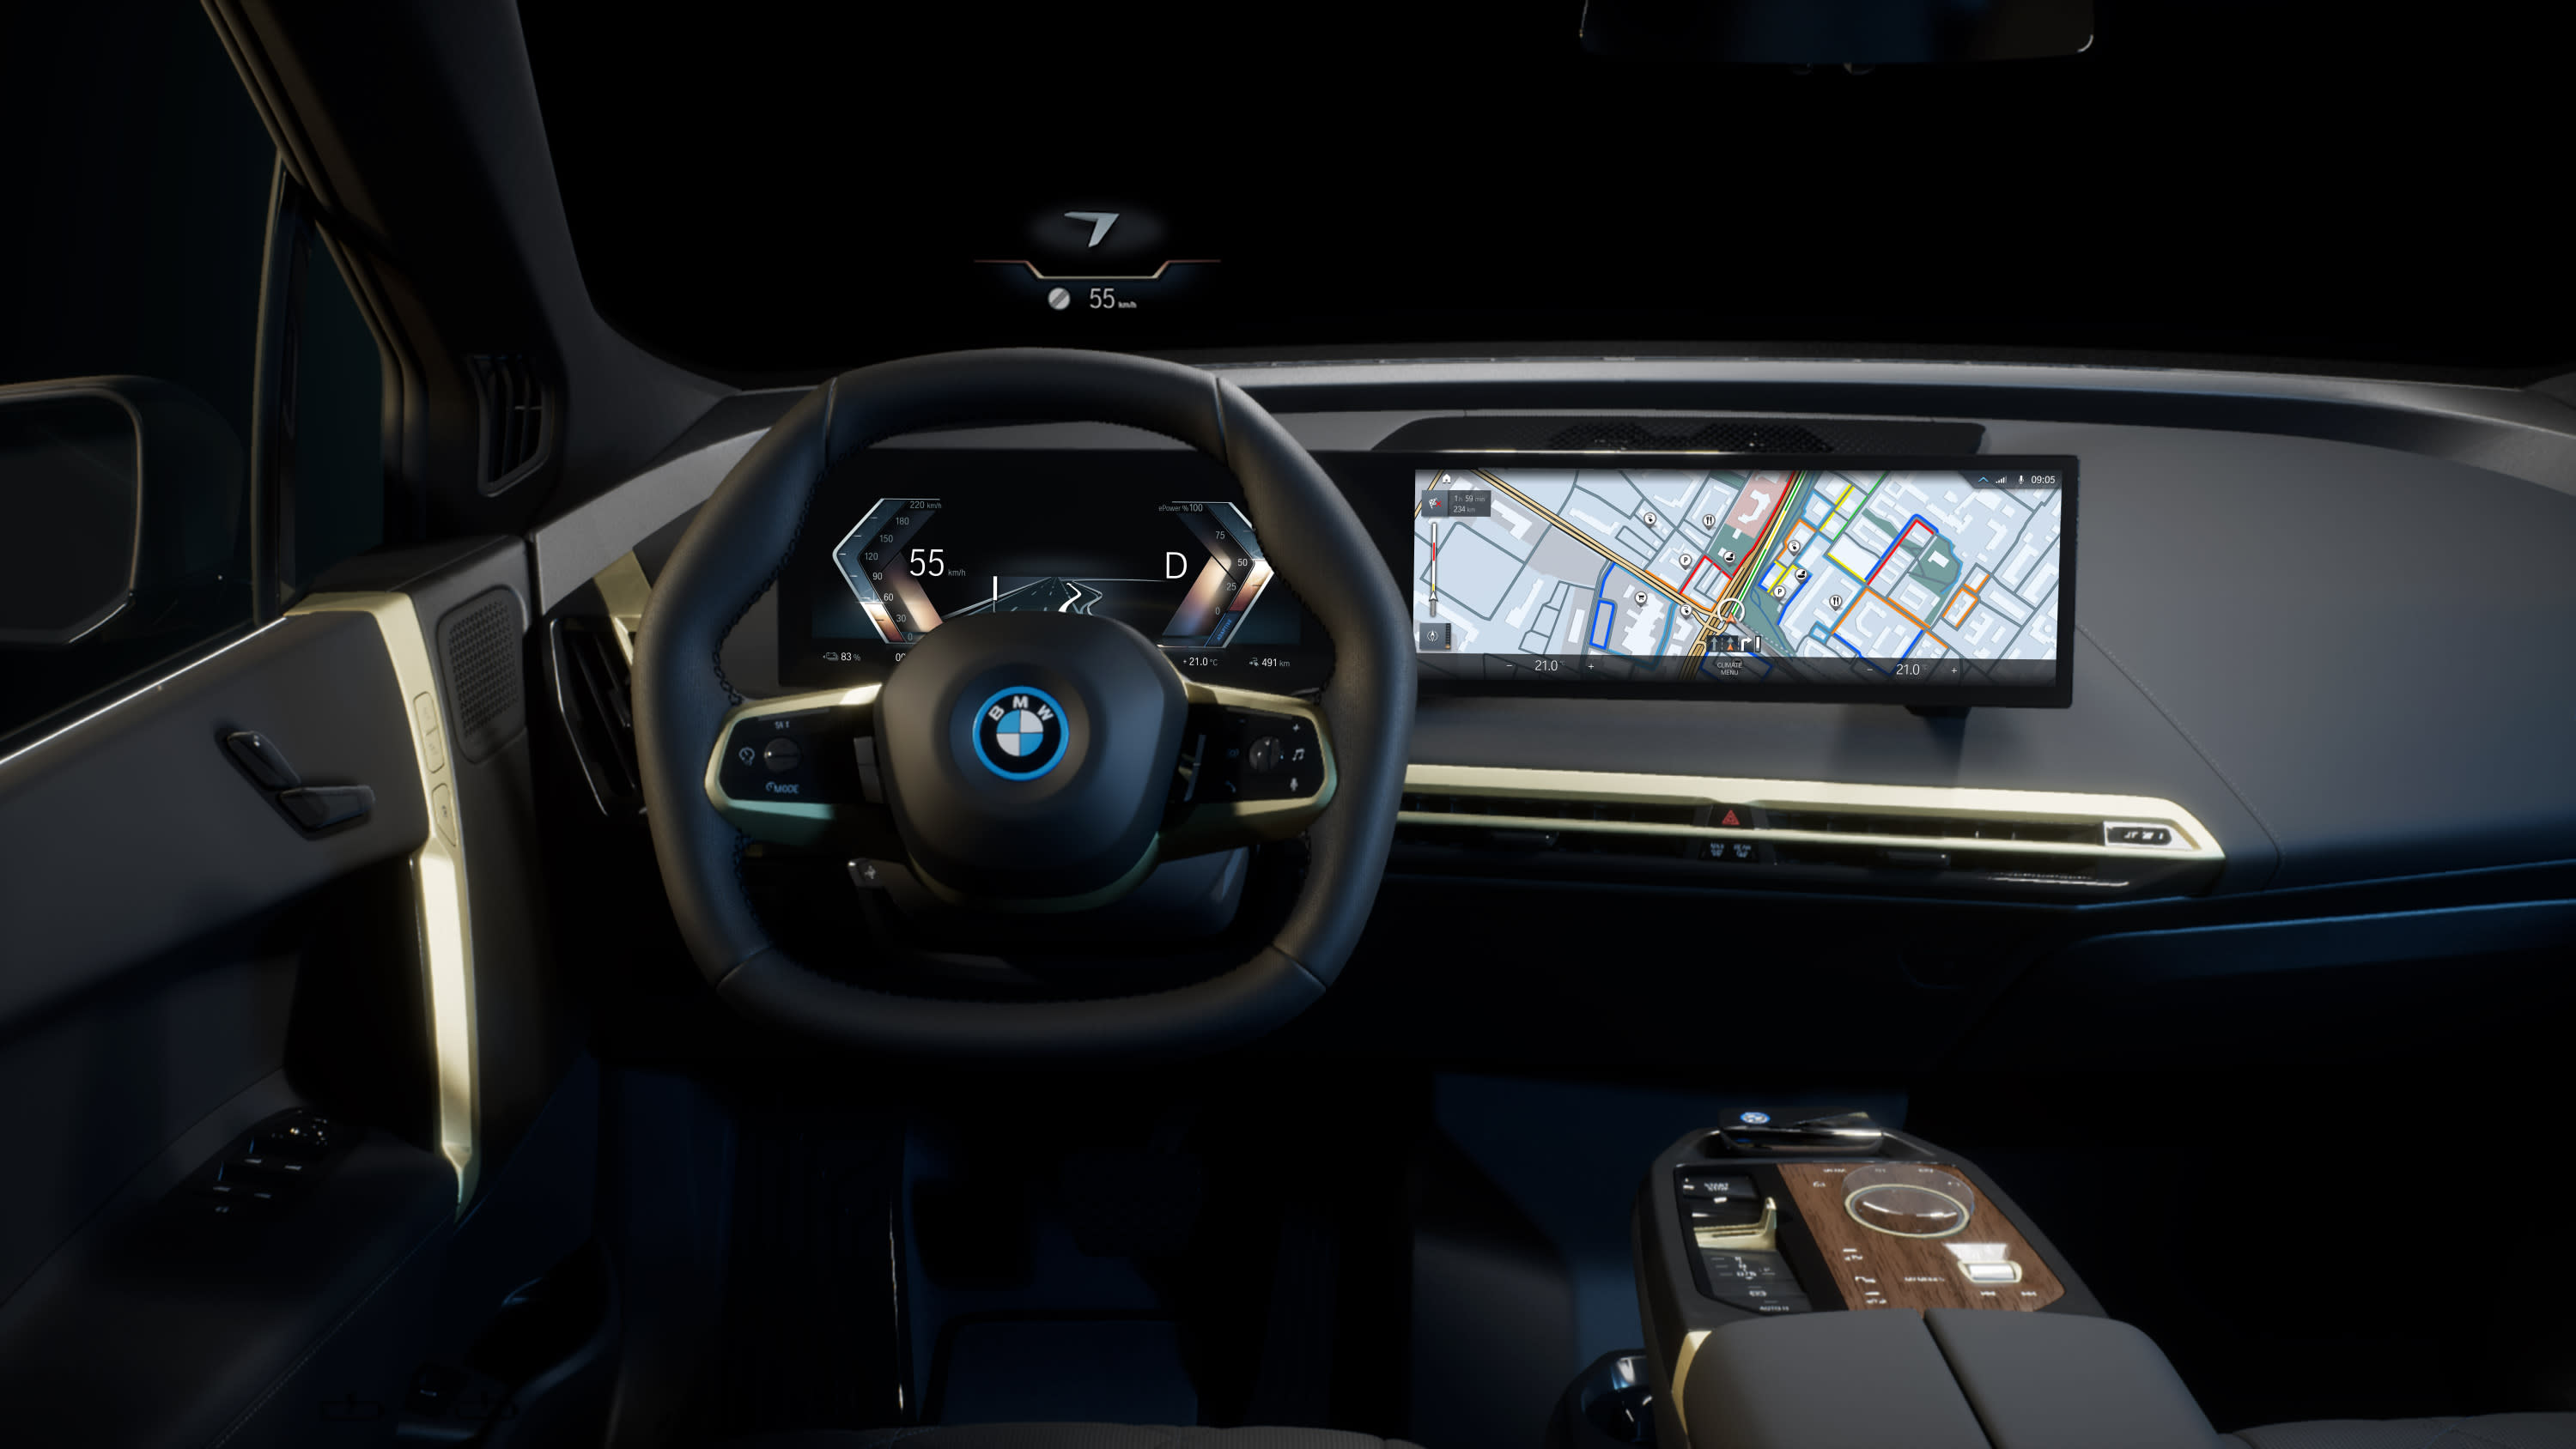 BMW’s iDrive 8 helps drivers use machine learning and natural language processing